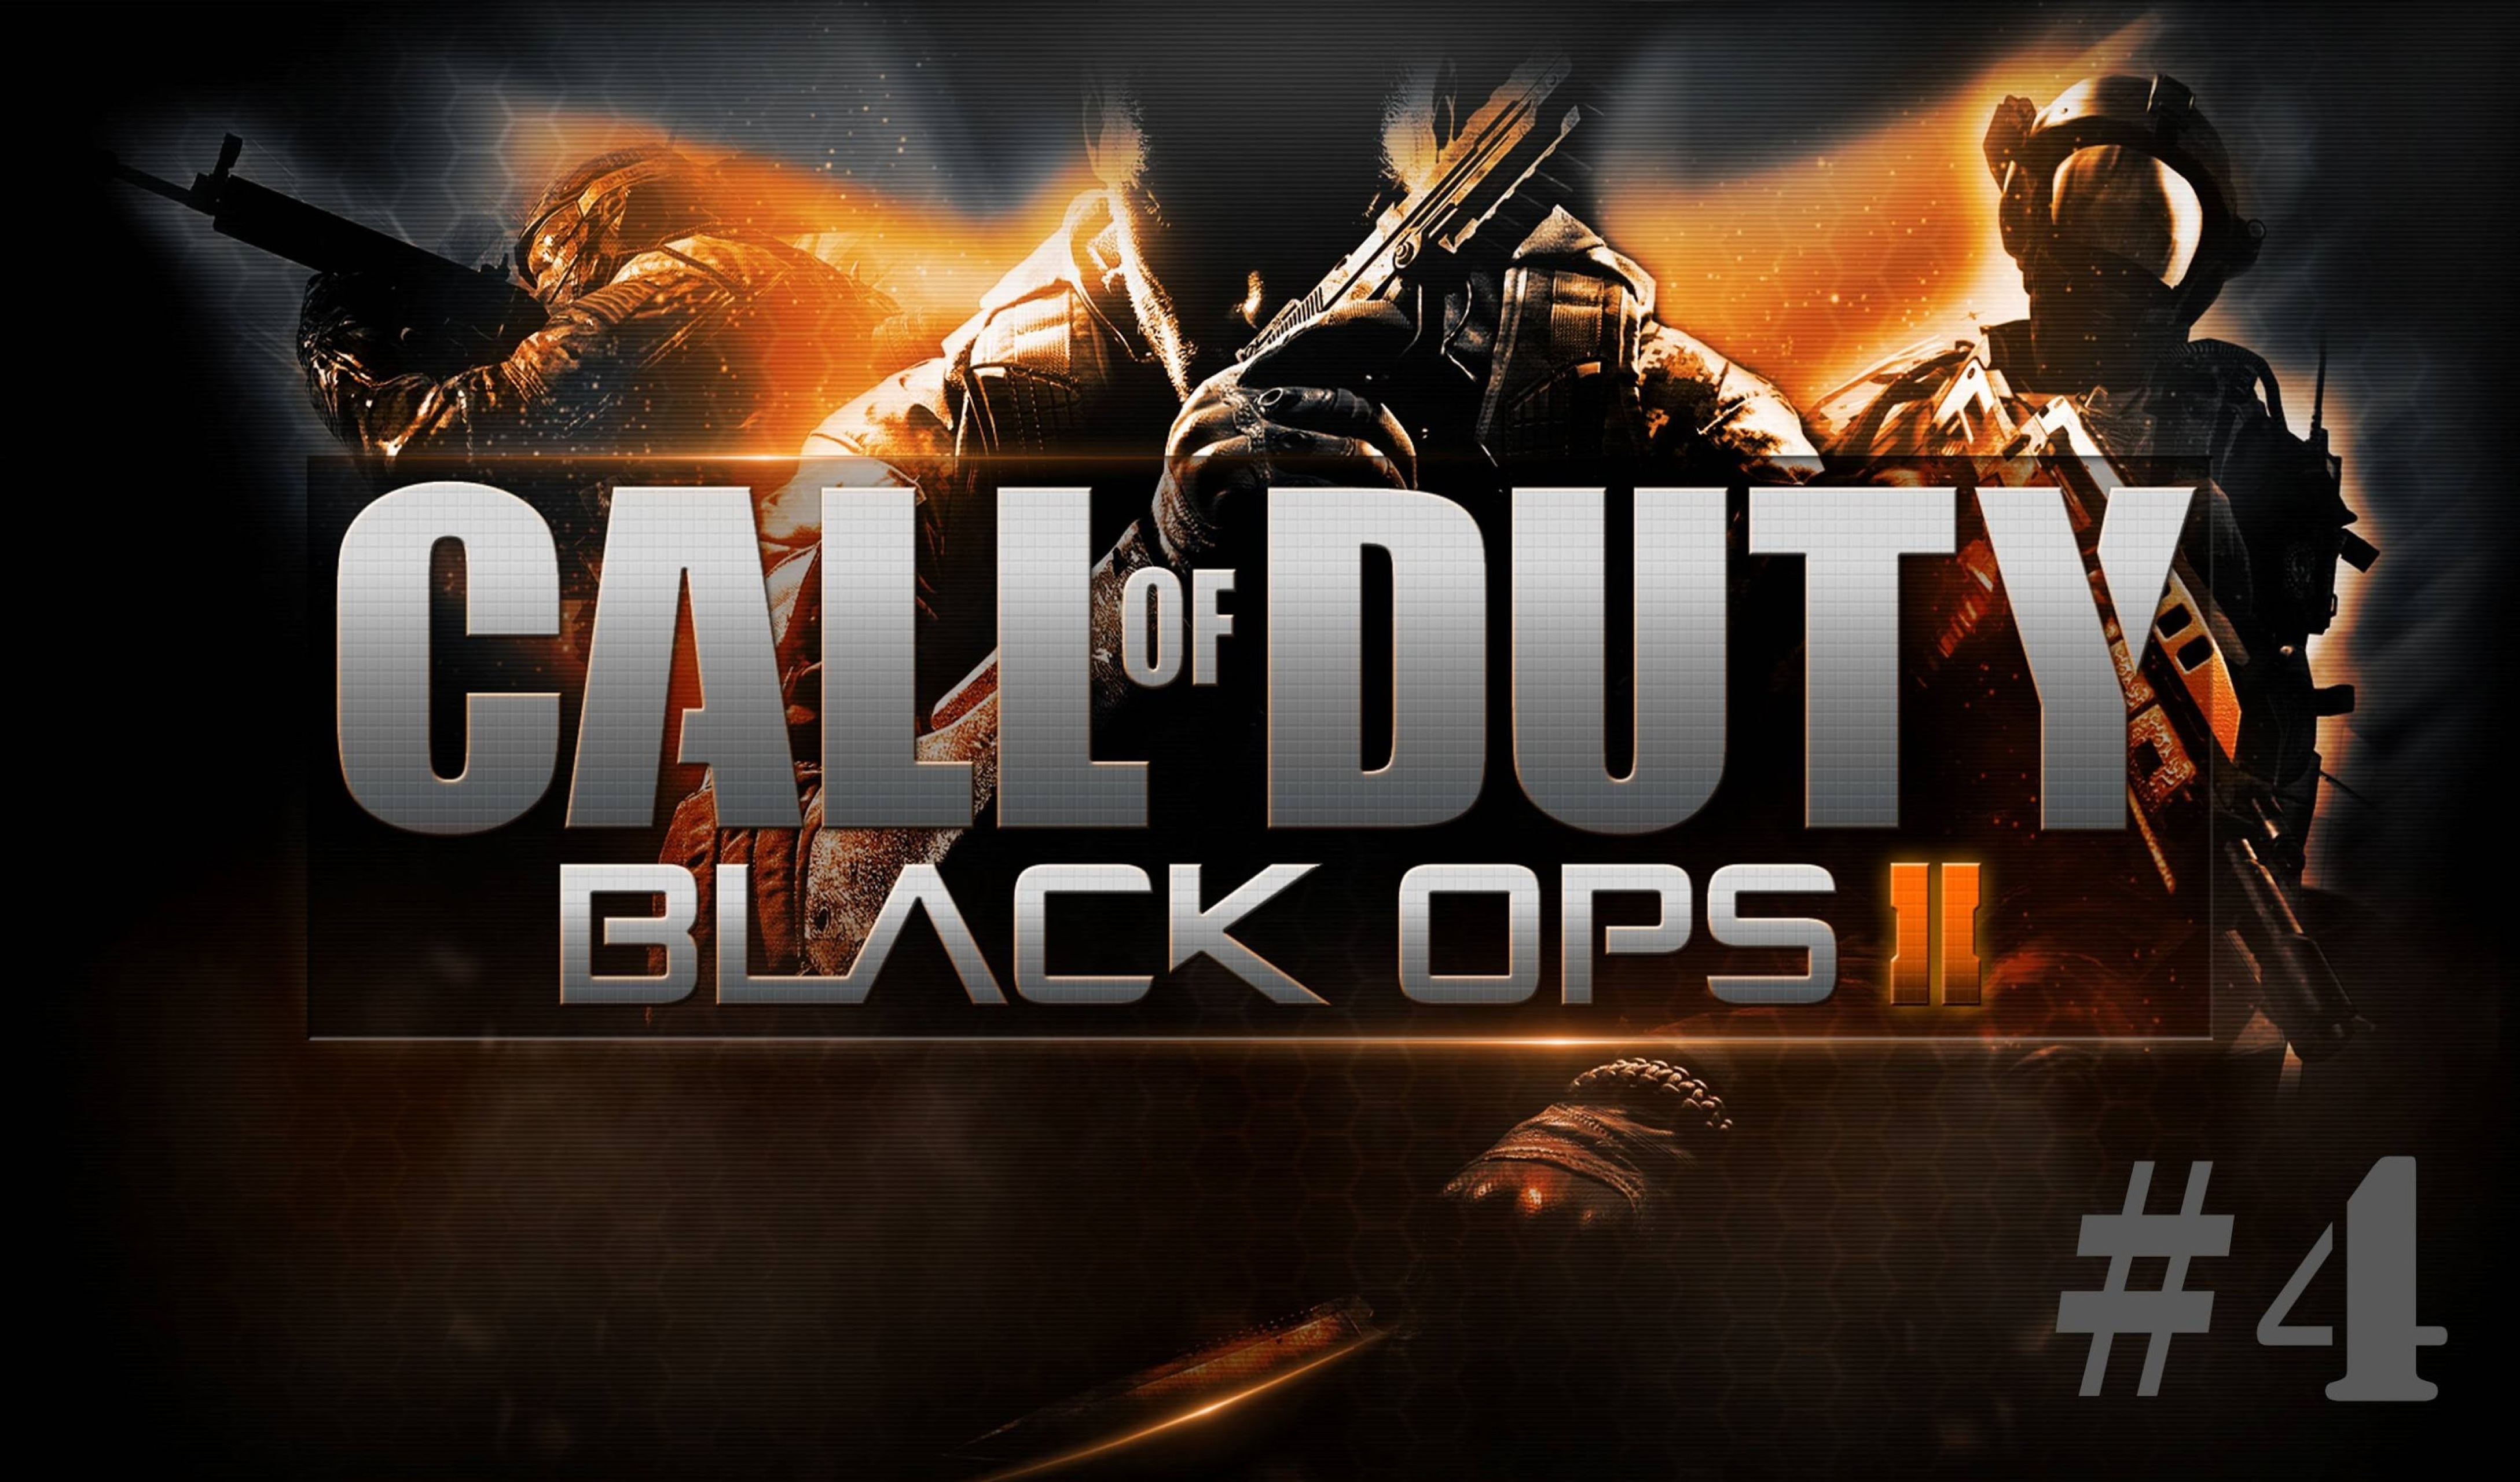 call of duty black ops ii english patch